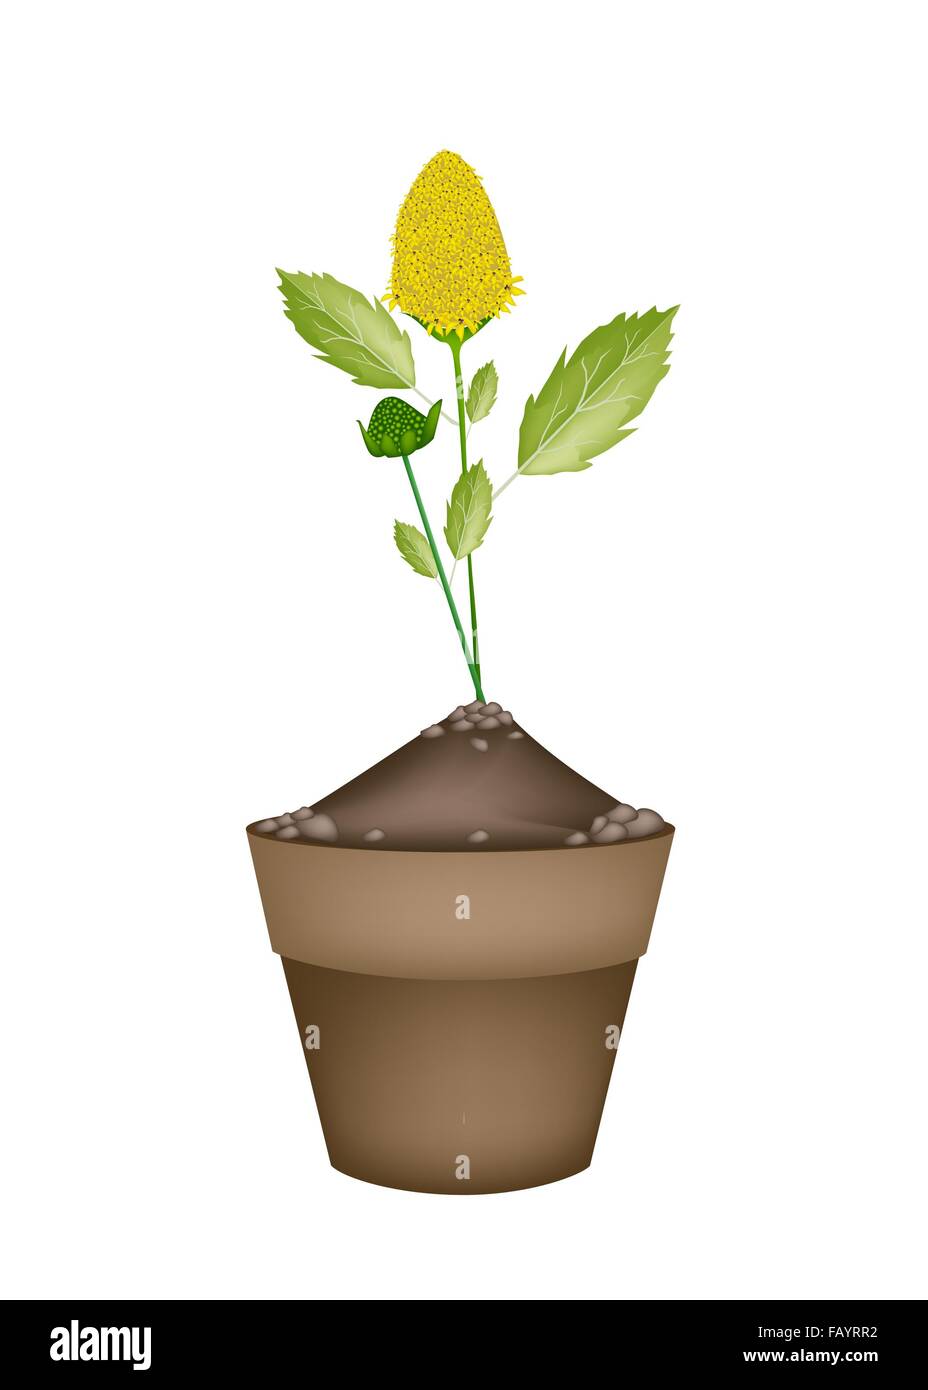 Vegetable and Herb, An Illustration of Fresh Paracress Plant with Beautiful Yellow Blossom in Terracotta Flower Pots Used for Se Stock Photo